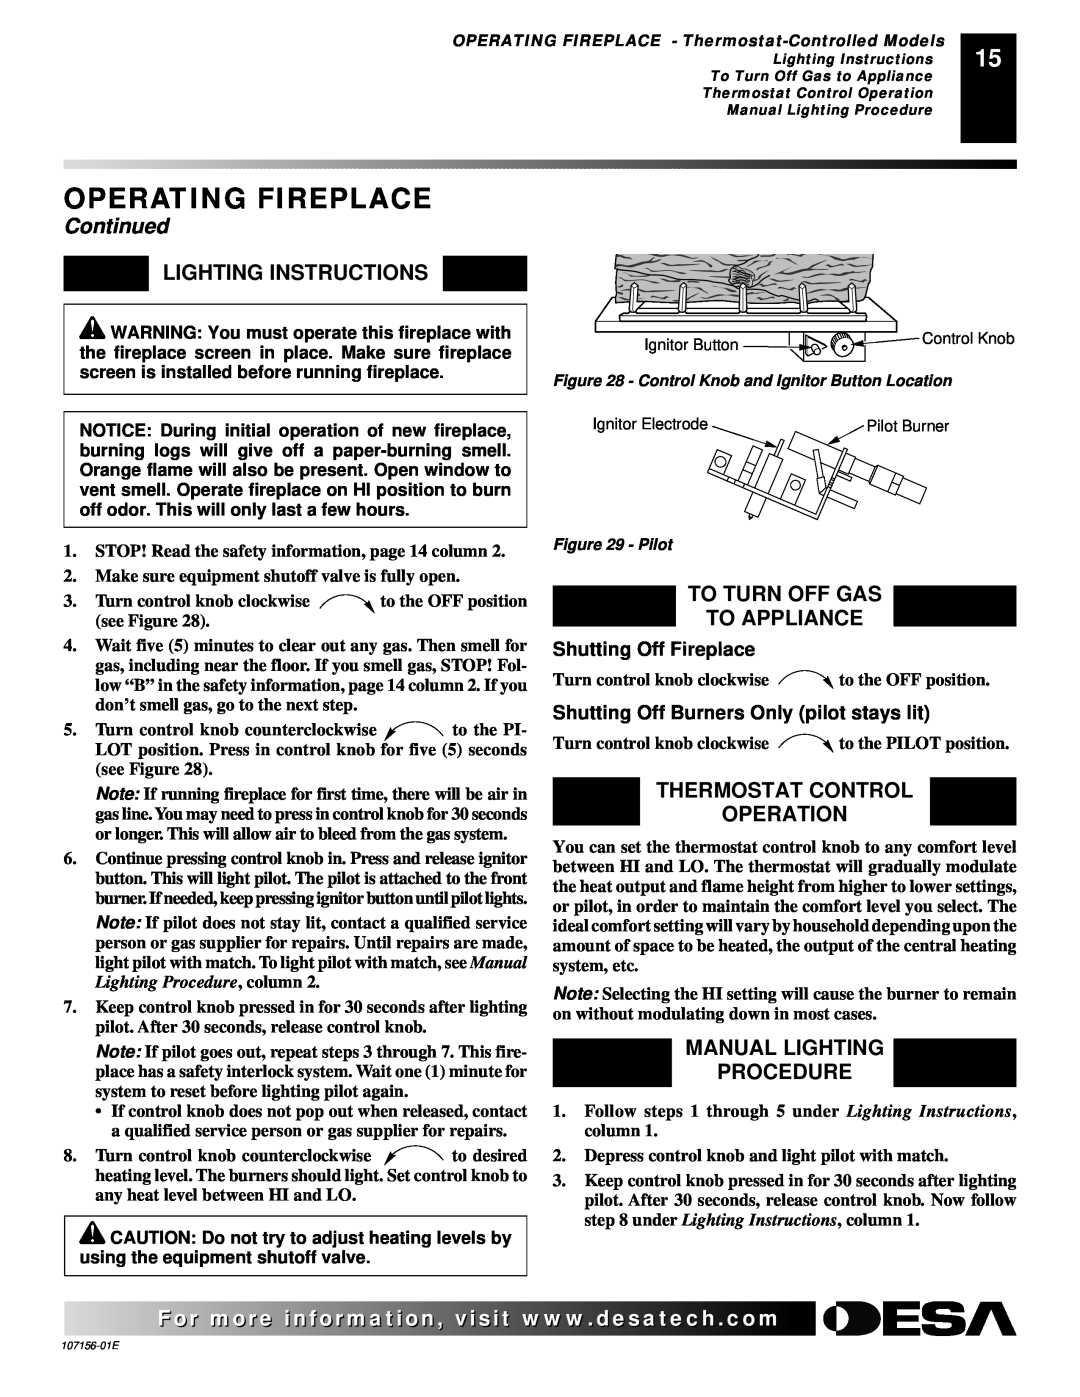 Vanguard Heating 107156-01E.pdf Lighting Instructions, To Turn Off Gas To Appliance, Thermostat Control Operation 